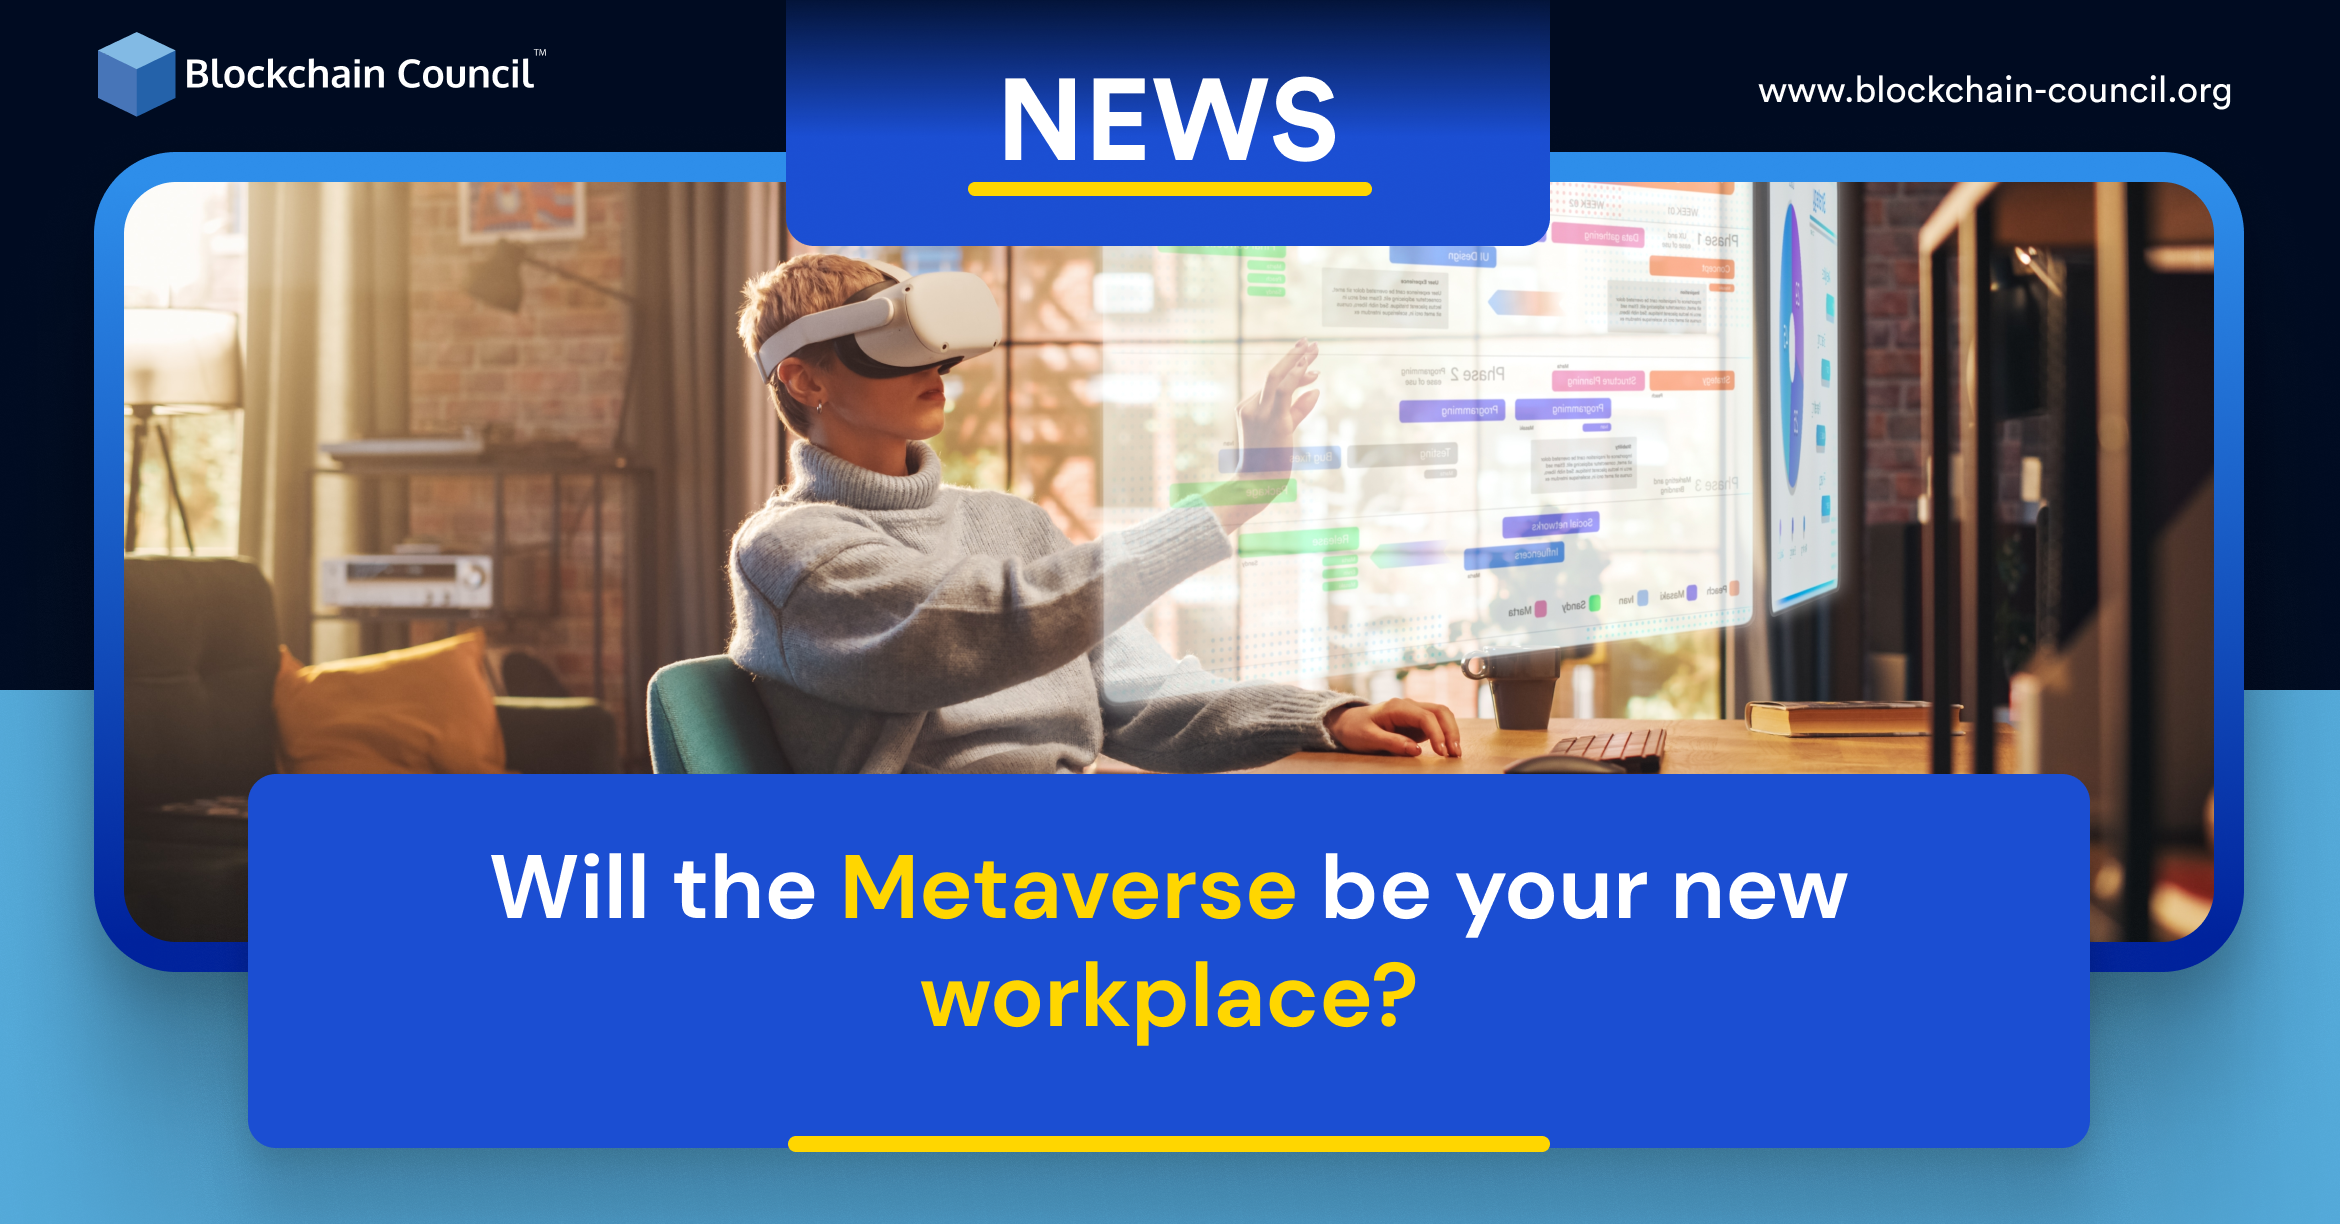 Will the Metaverse be your new workplace?